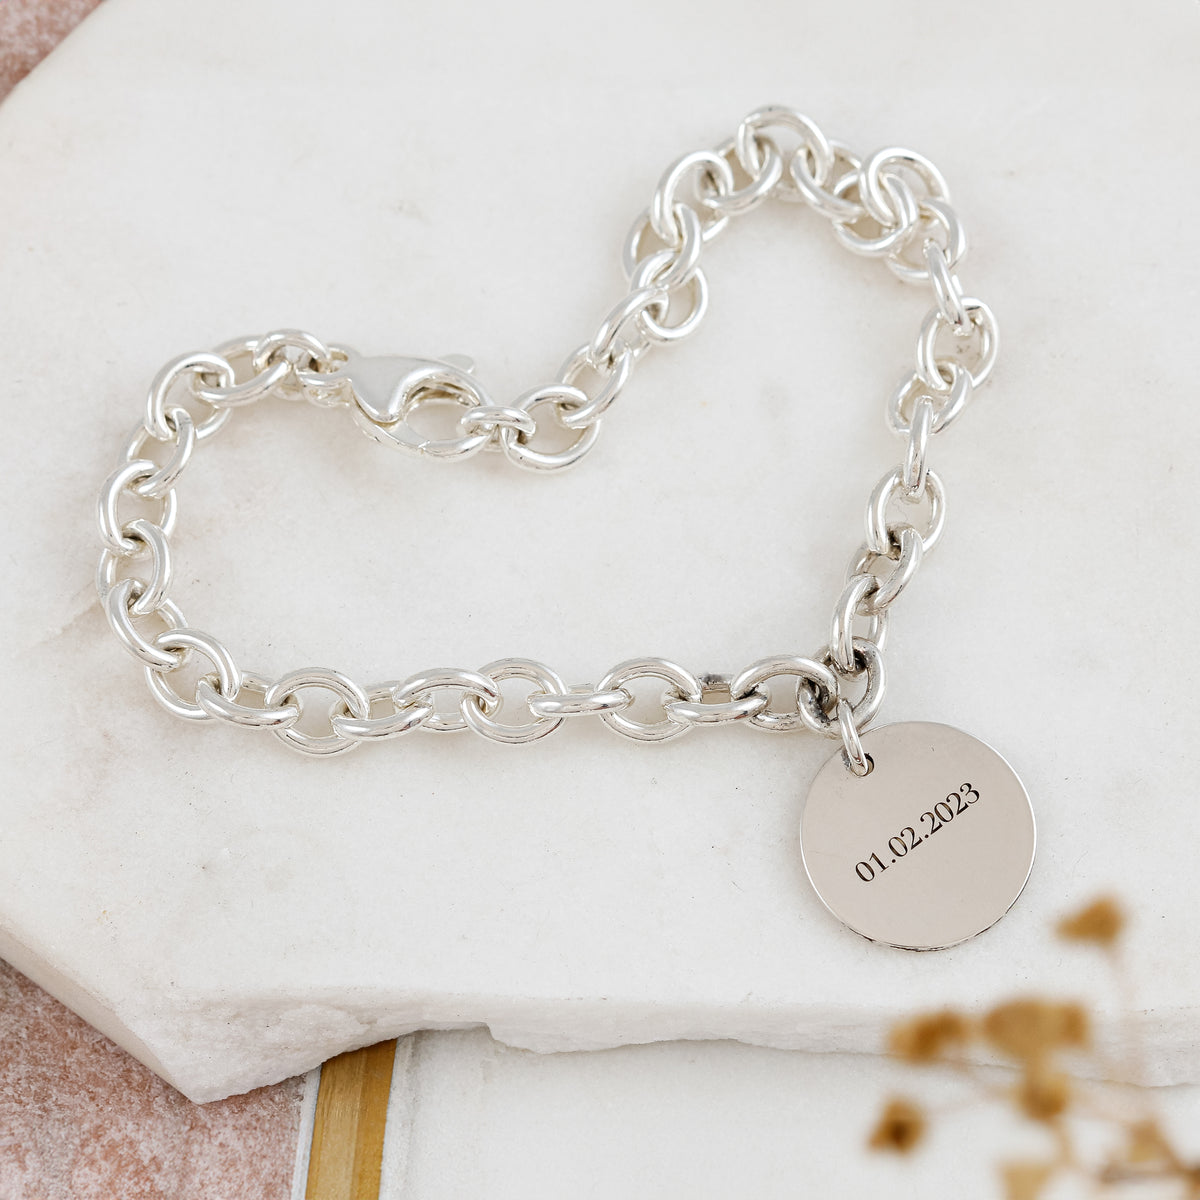 silver disc tag with charm bracelet